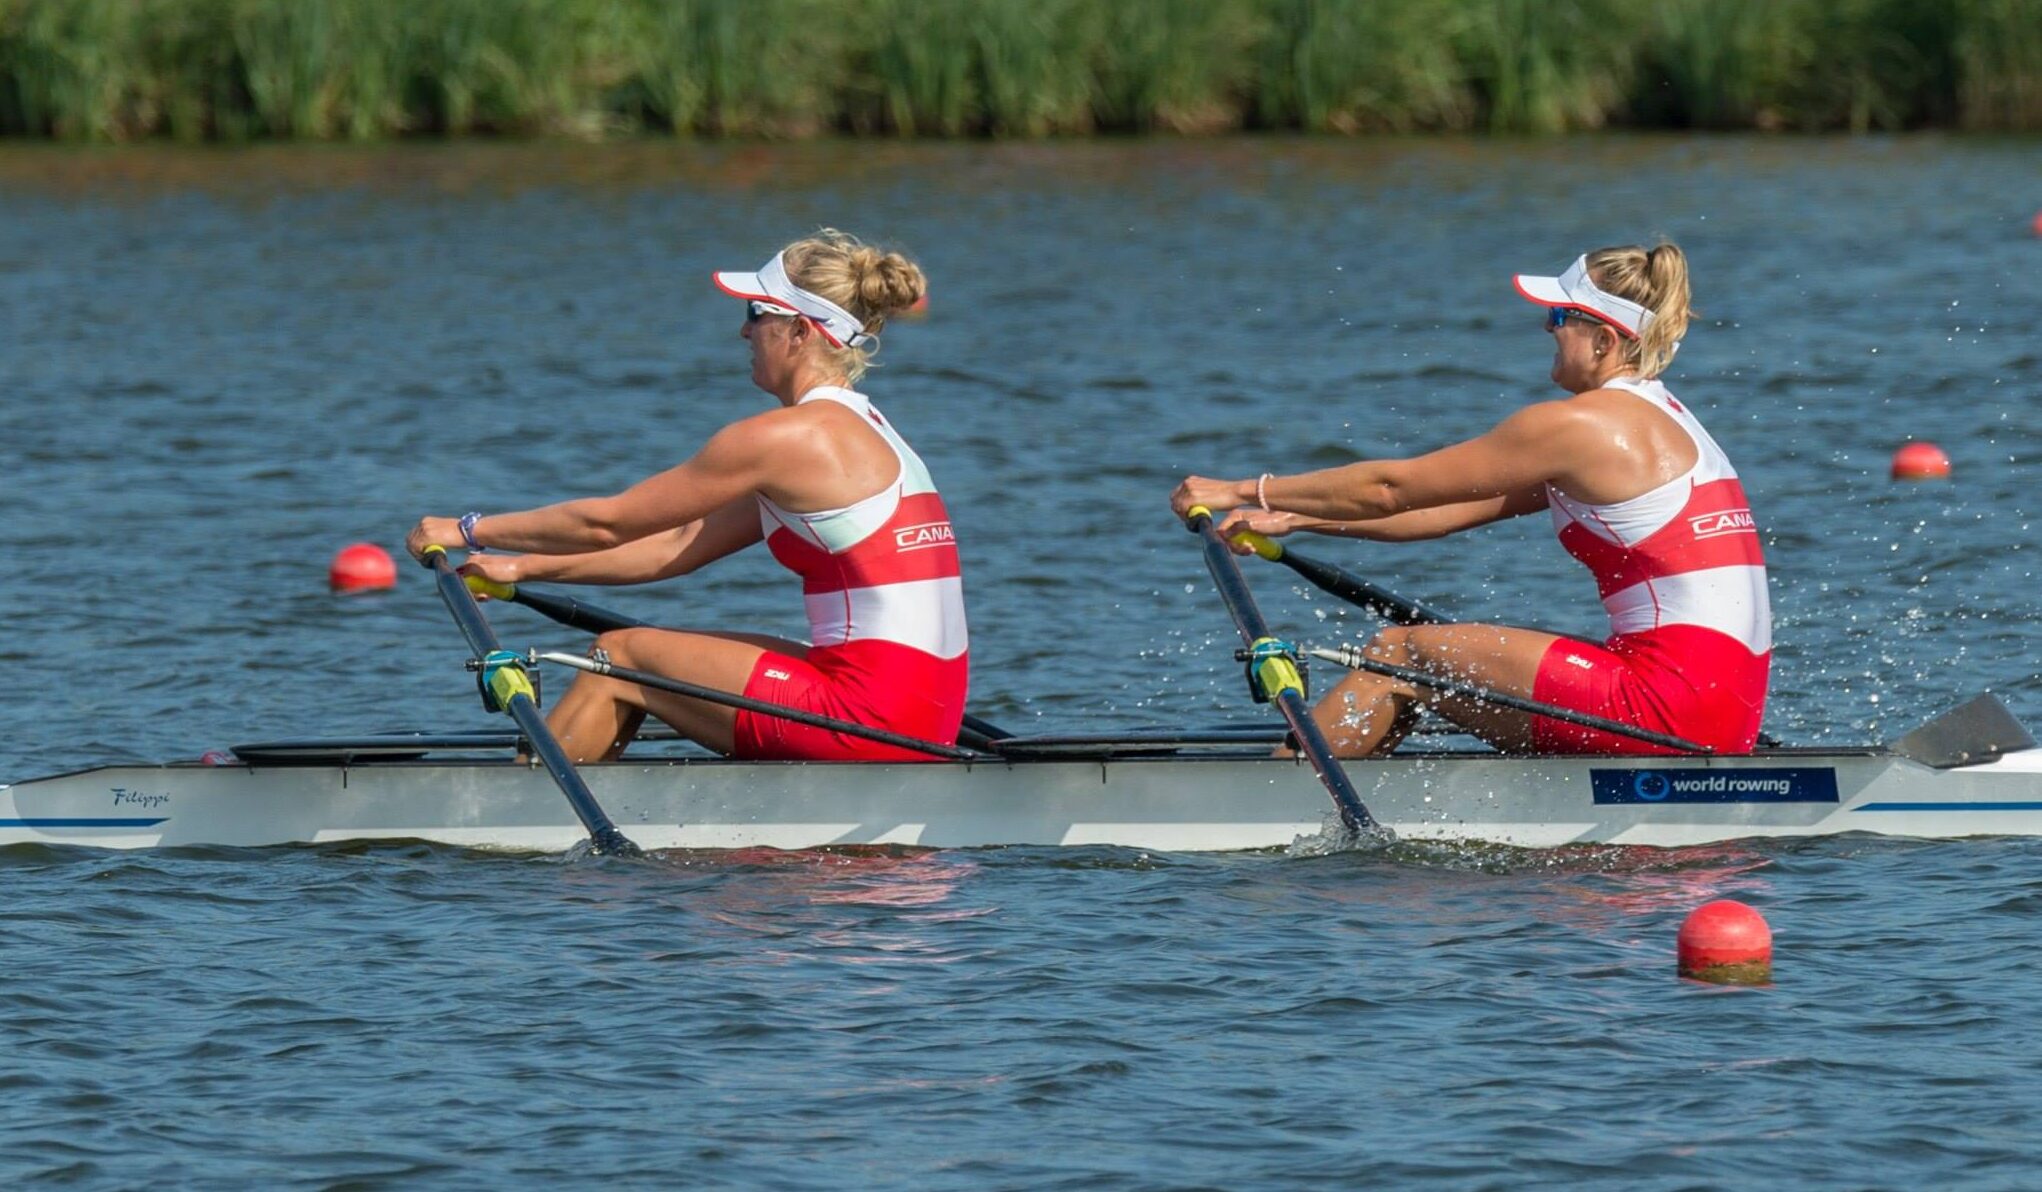 Two women wearing red and white uniforms rigorously rowing on calm water with tall grass in the background.